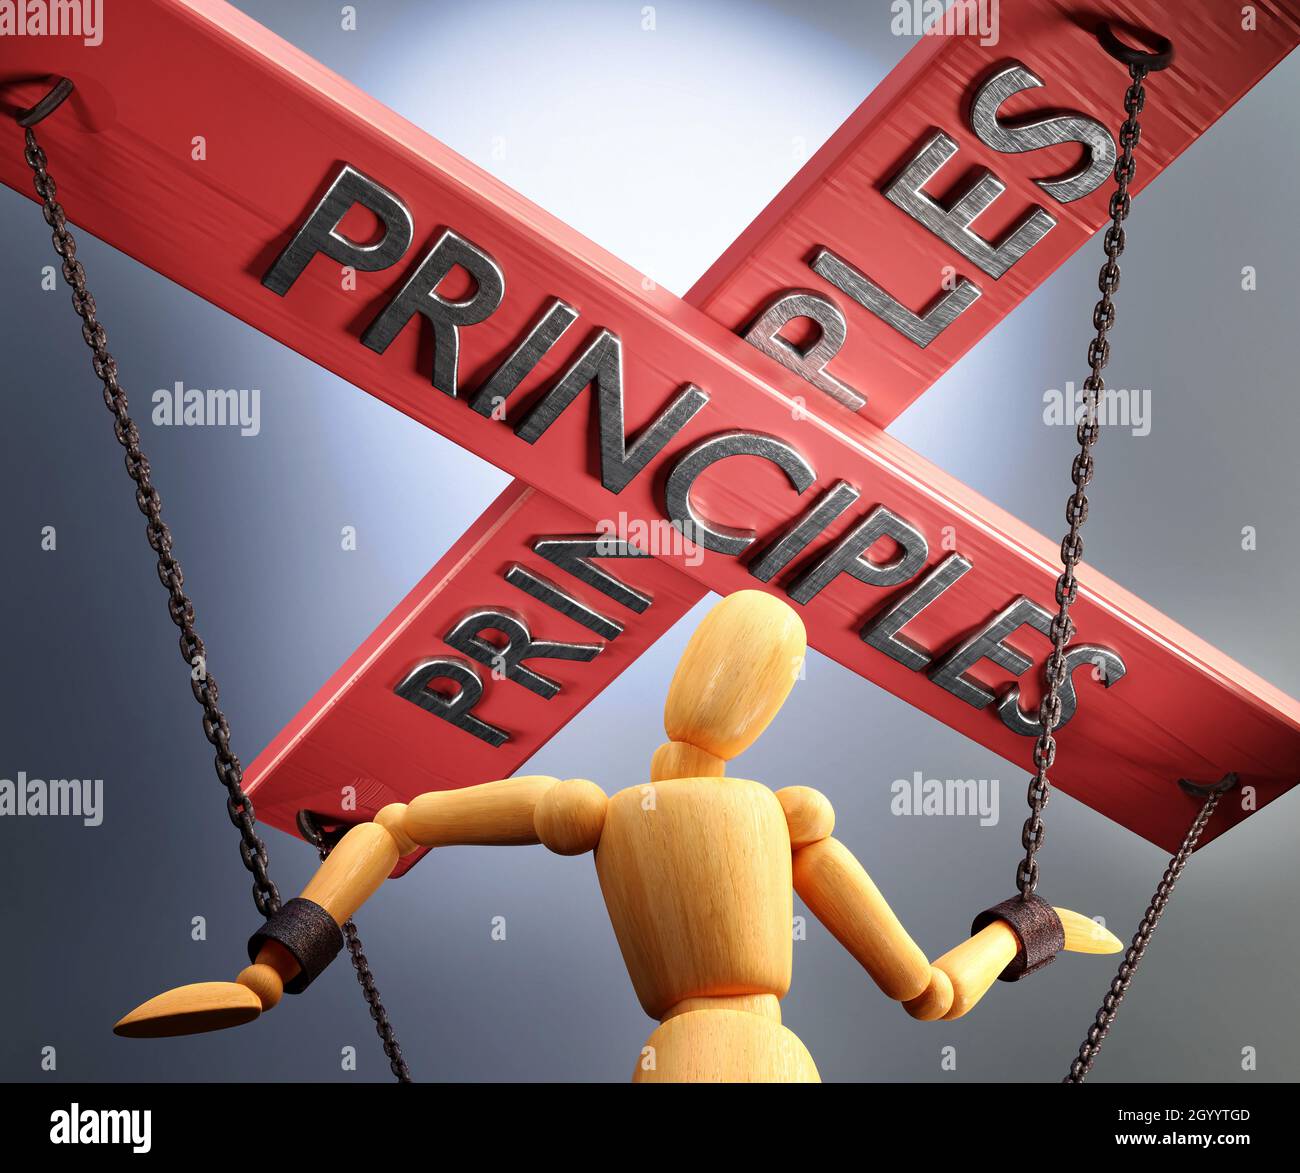 Principles control, power, authority and manipulation symbolized by control bar with word Principles pulling the strings (chains) of a wooden puppet, Stock Photo